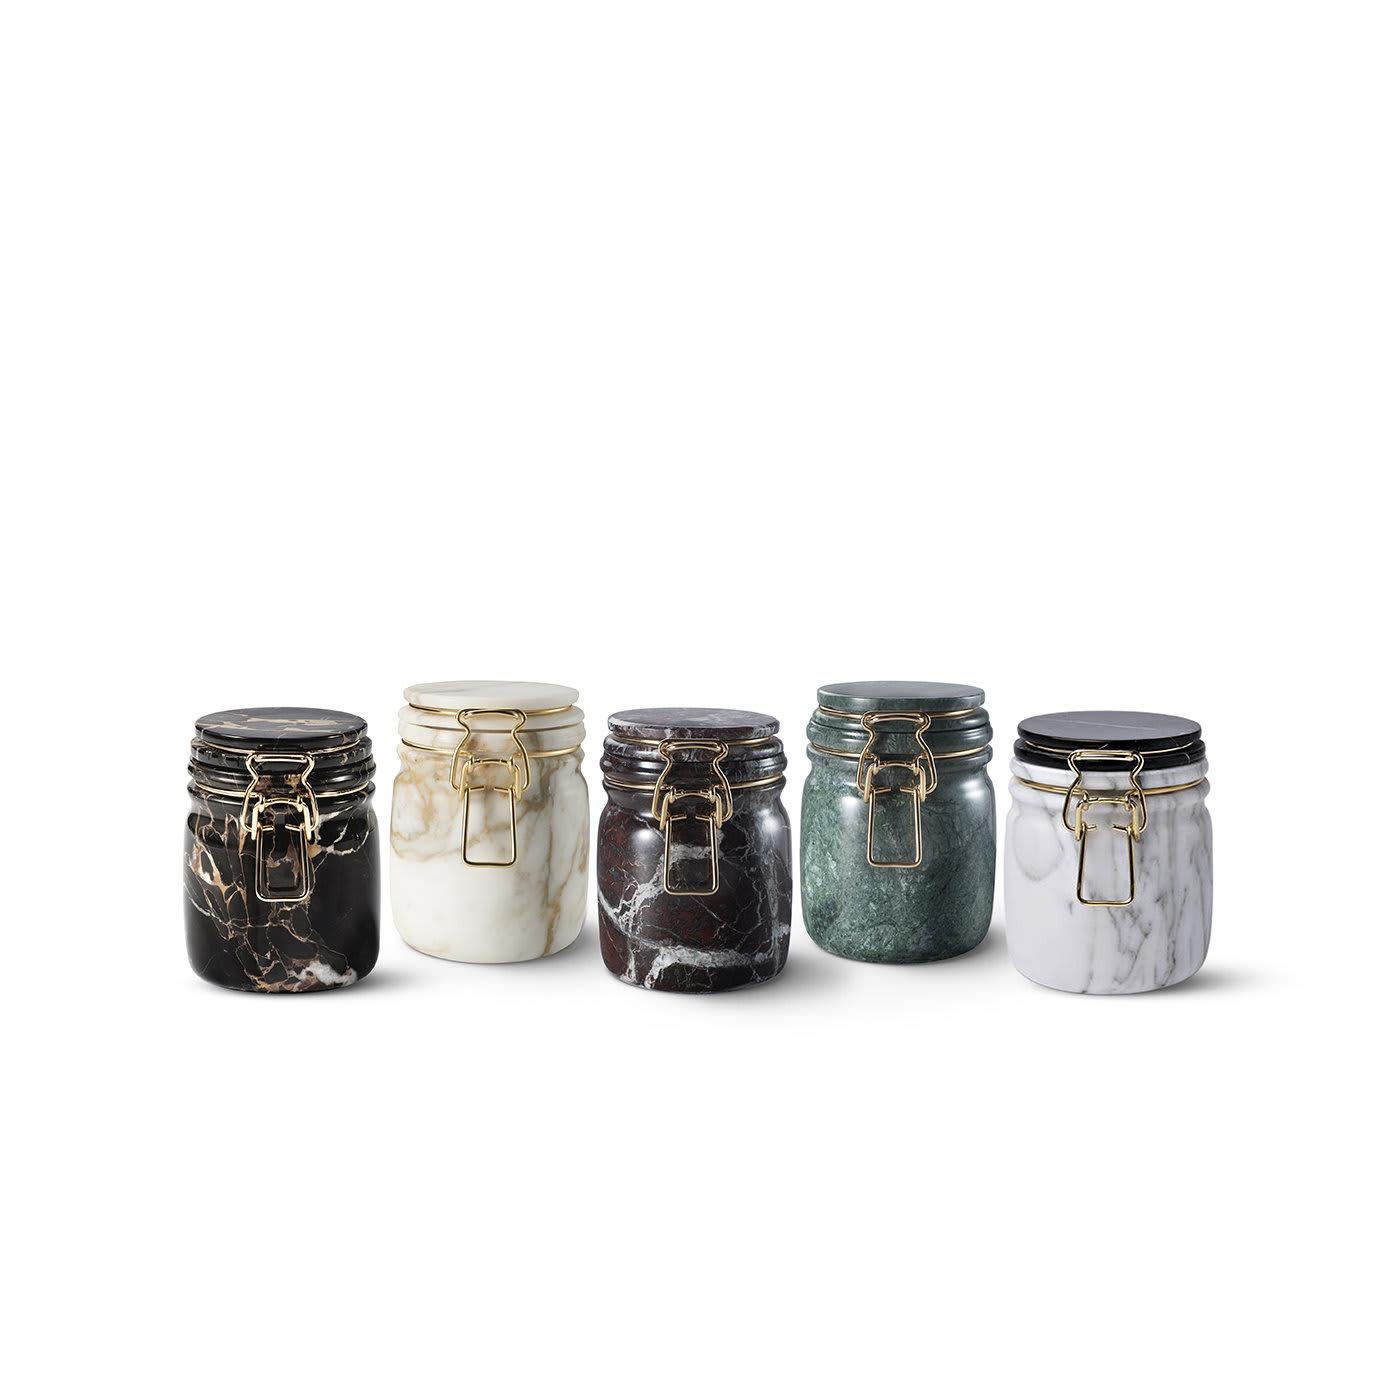 The stunning natural patterns of the Red Levanto marble grace the surface of this jar, shaped in the same volumes of the traditional marmalade jam. This one-of-a-kind piece is finished with a latch in brass that adds a warm and precious glow to it.